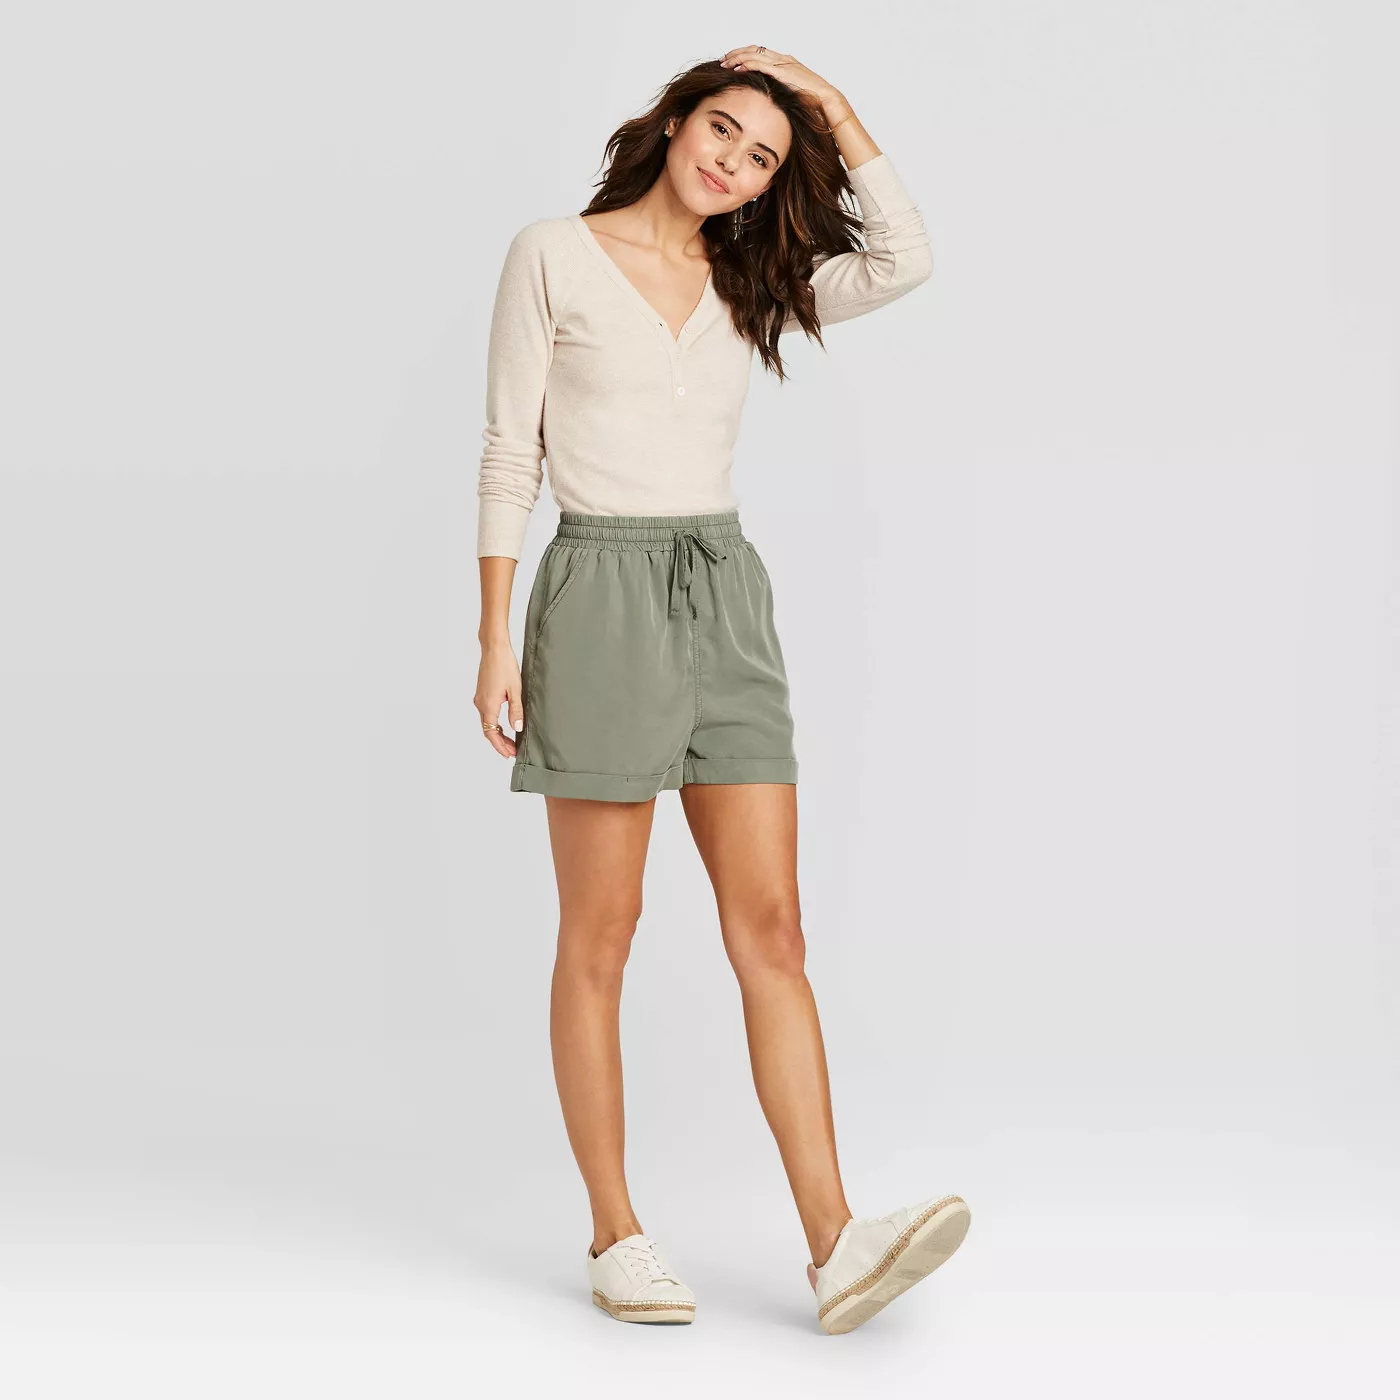 Women's Mid-Rise Tie Front Utility Shorts - Universal Thread™ - image 3 of 10